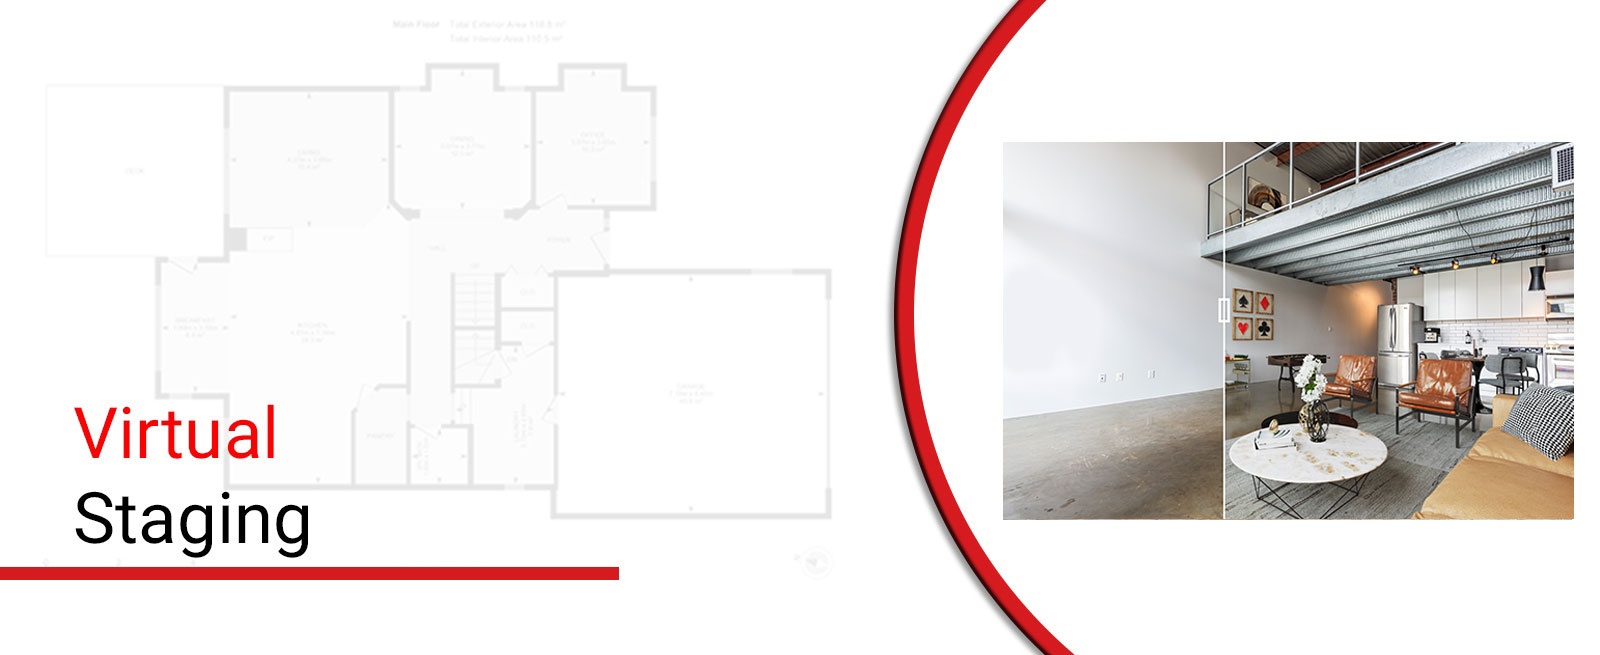 Virtual Staging - Square Feet Photography and Floor Plans